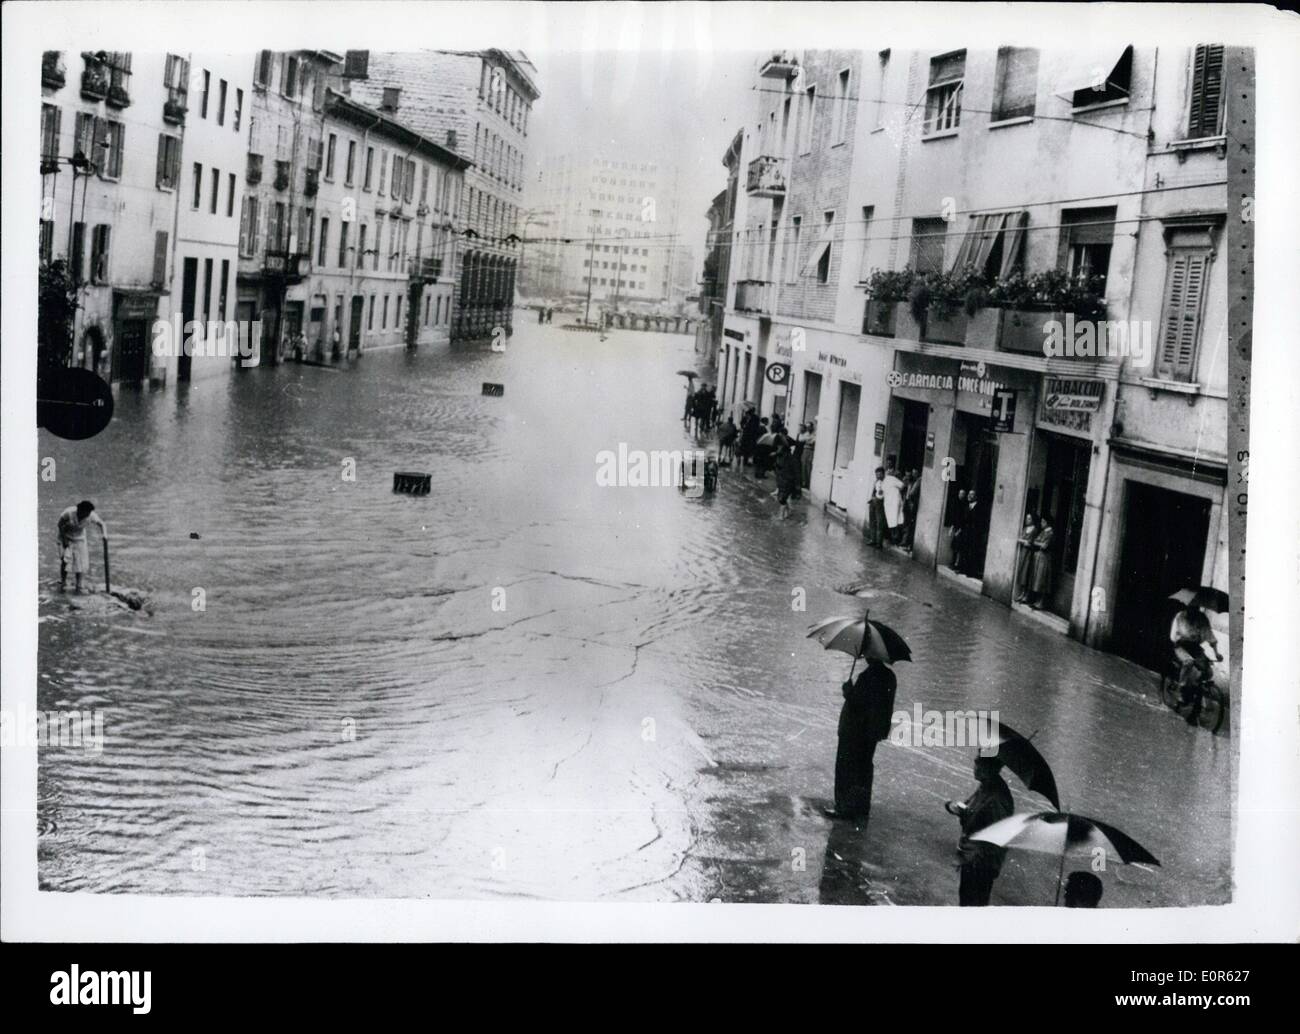 Jun. 06, 1958 - Violent Cloudbursts cause widespread floods in Italy. Main street of Brescia - Under water : many parts of Italy were flooded - following violent cloudbursts which caused rivers to overflow. One of the worst hit places was the town of Brescia. Photo Shows General view of the main street in Brescia after the overflowing of the River Garza. Through this street normally passes traffic for Milan -Triente - Venice - Cremona etc. Stock Photo